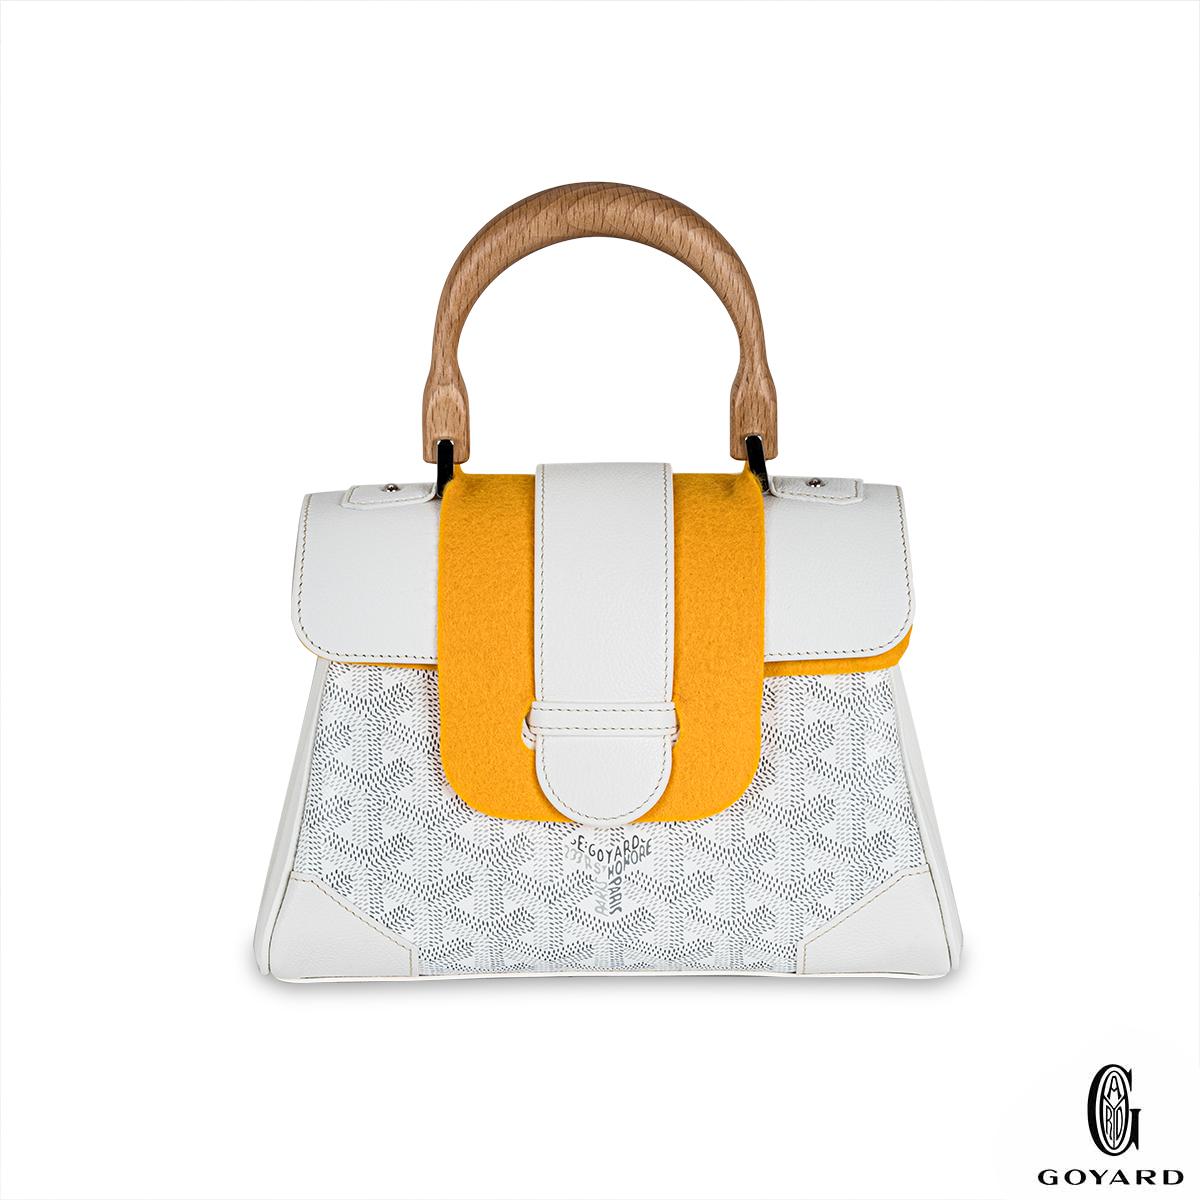 A sophisticated Mini Saigon handbag by Goyard. The exterior is crafted in the white signature Goyardine coated canvas with a wooden handle and foldover front lock that gives this bag a unique structure. The interior features a bright yellow calf